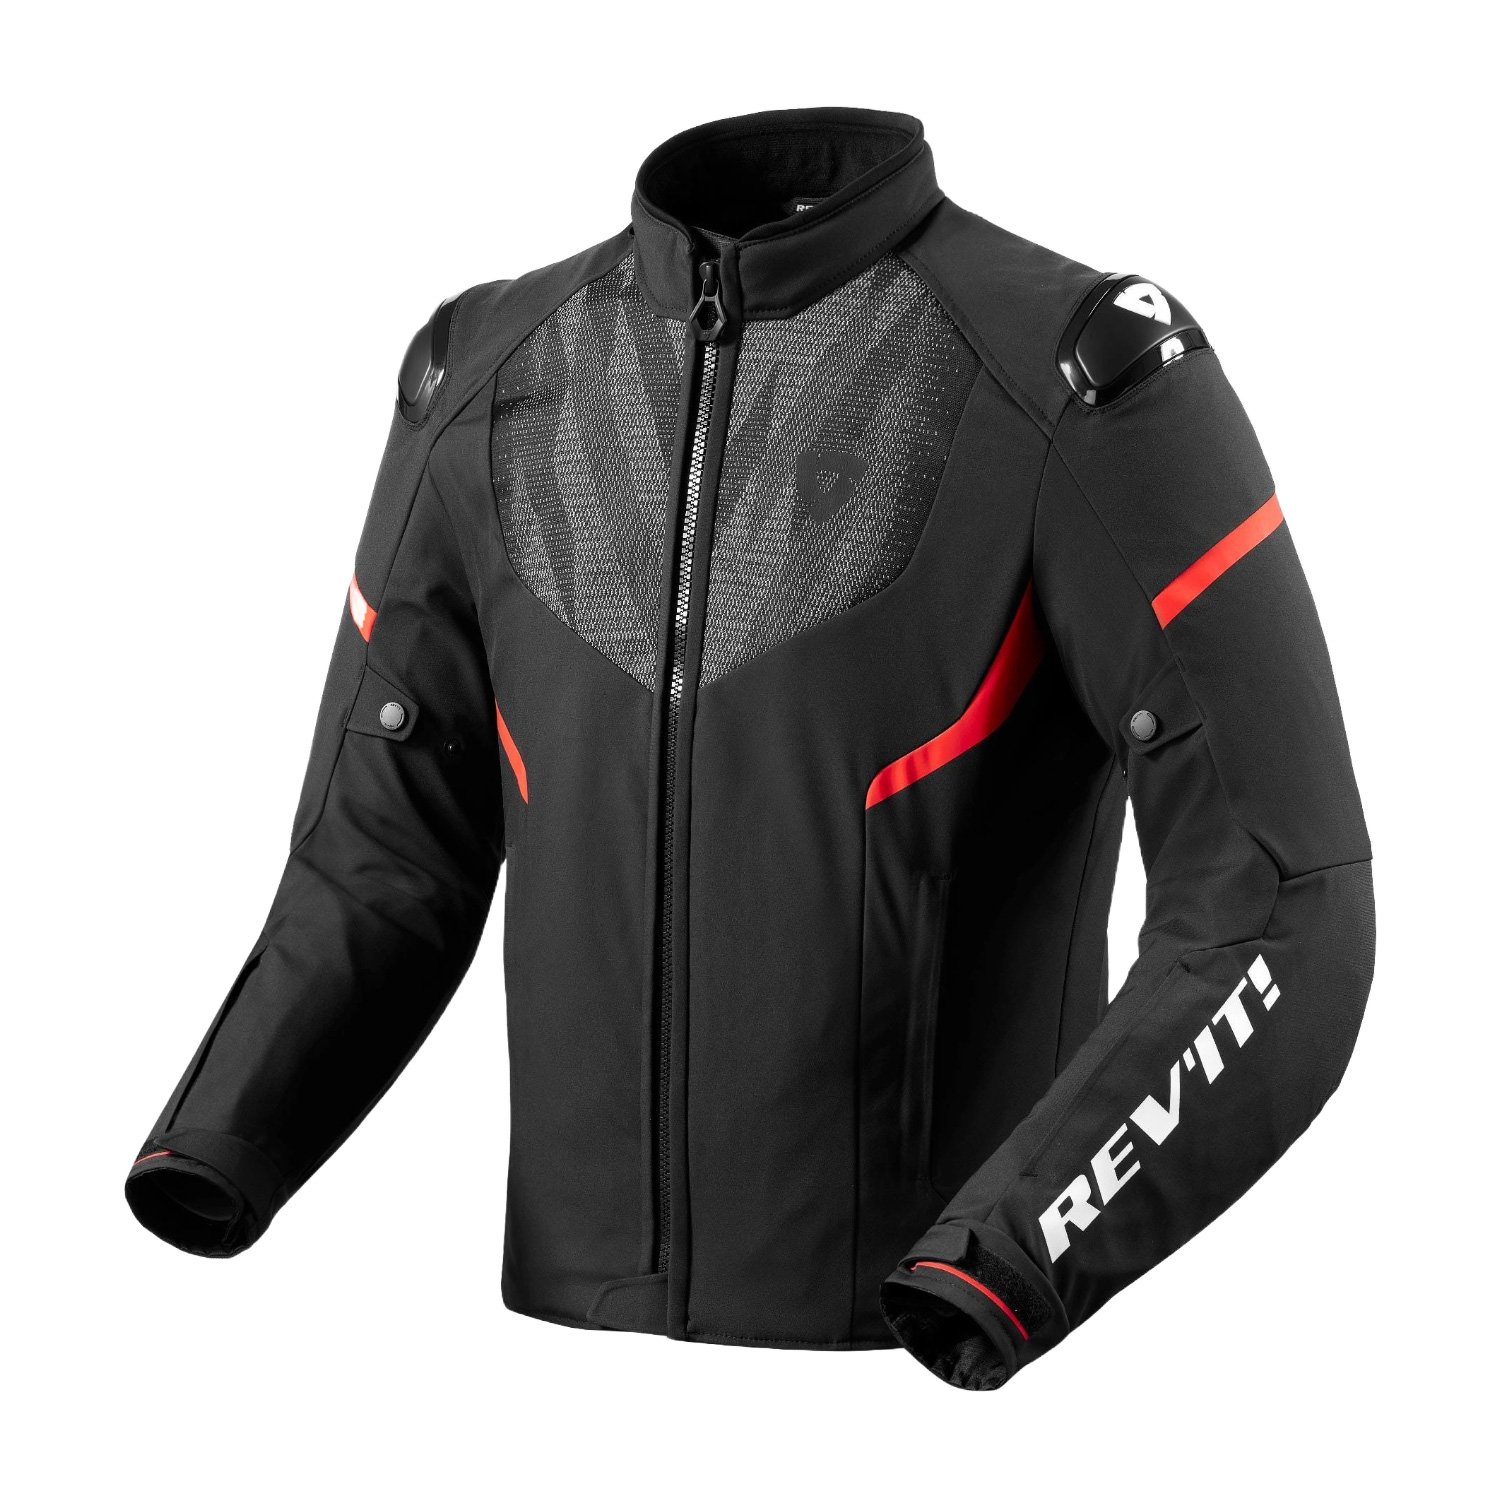 Image of REV'IT! Hyperspeed 2 H2O Noir Neon Rouge Blouson Taille 2XL